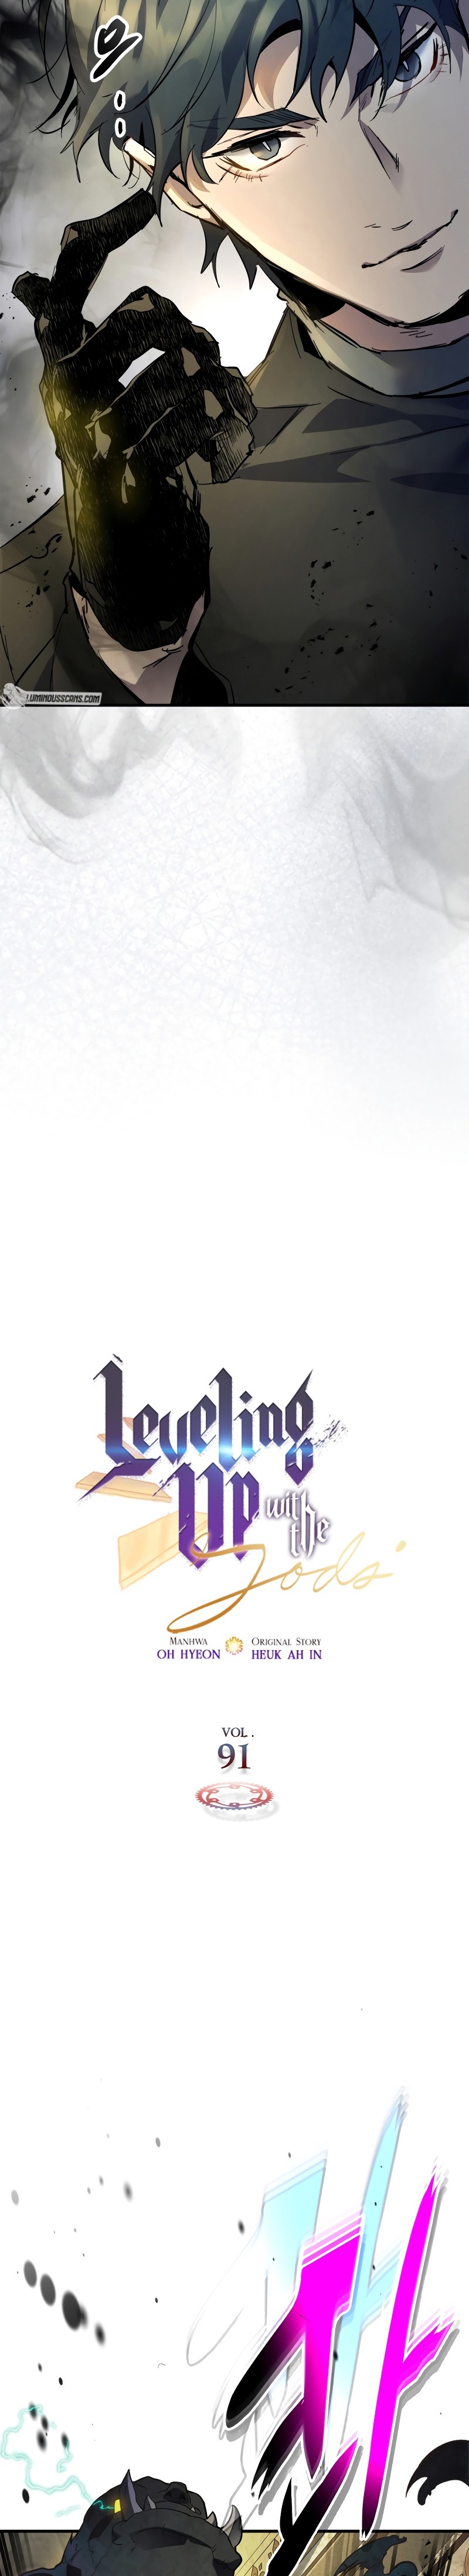 leveling with the gods 91.02